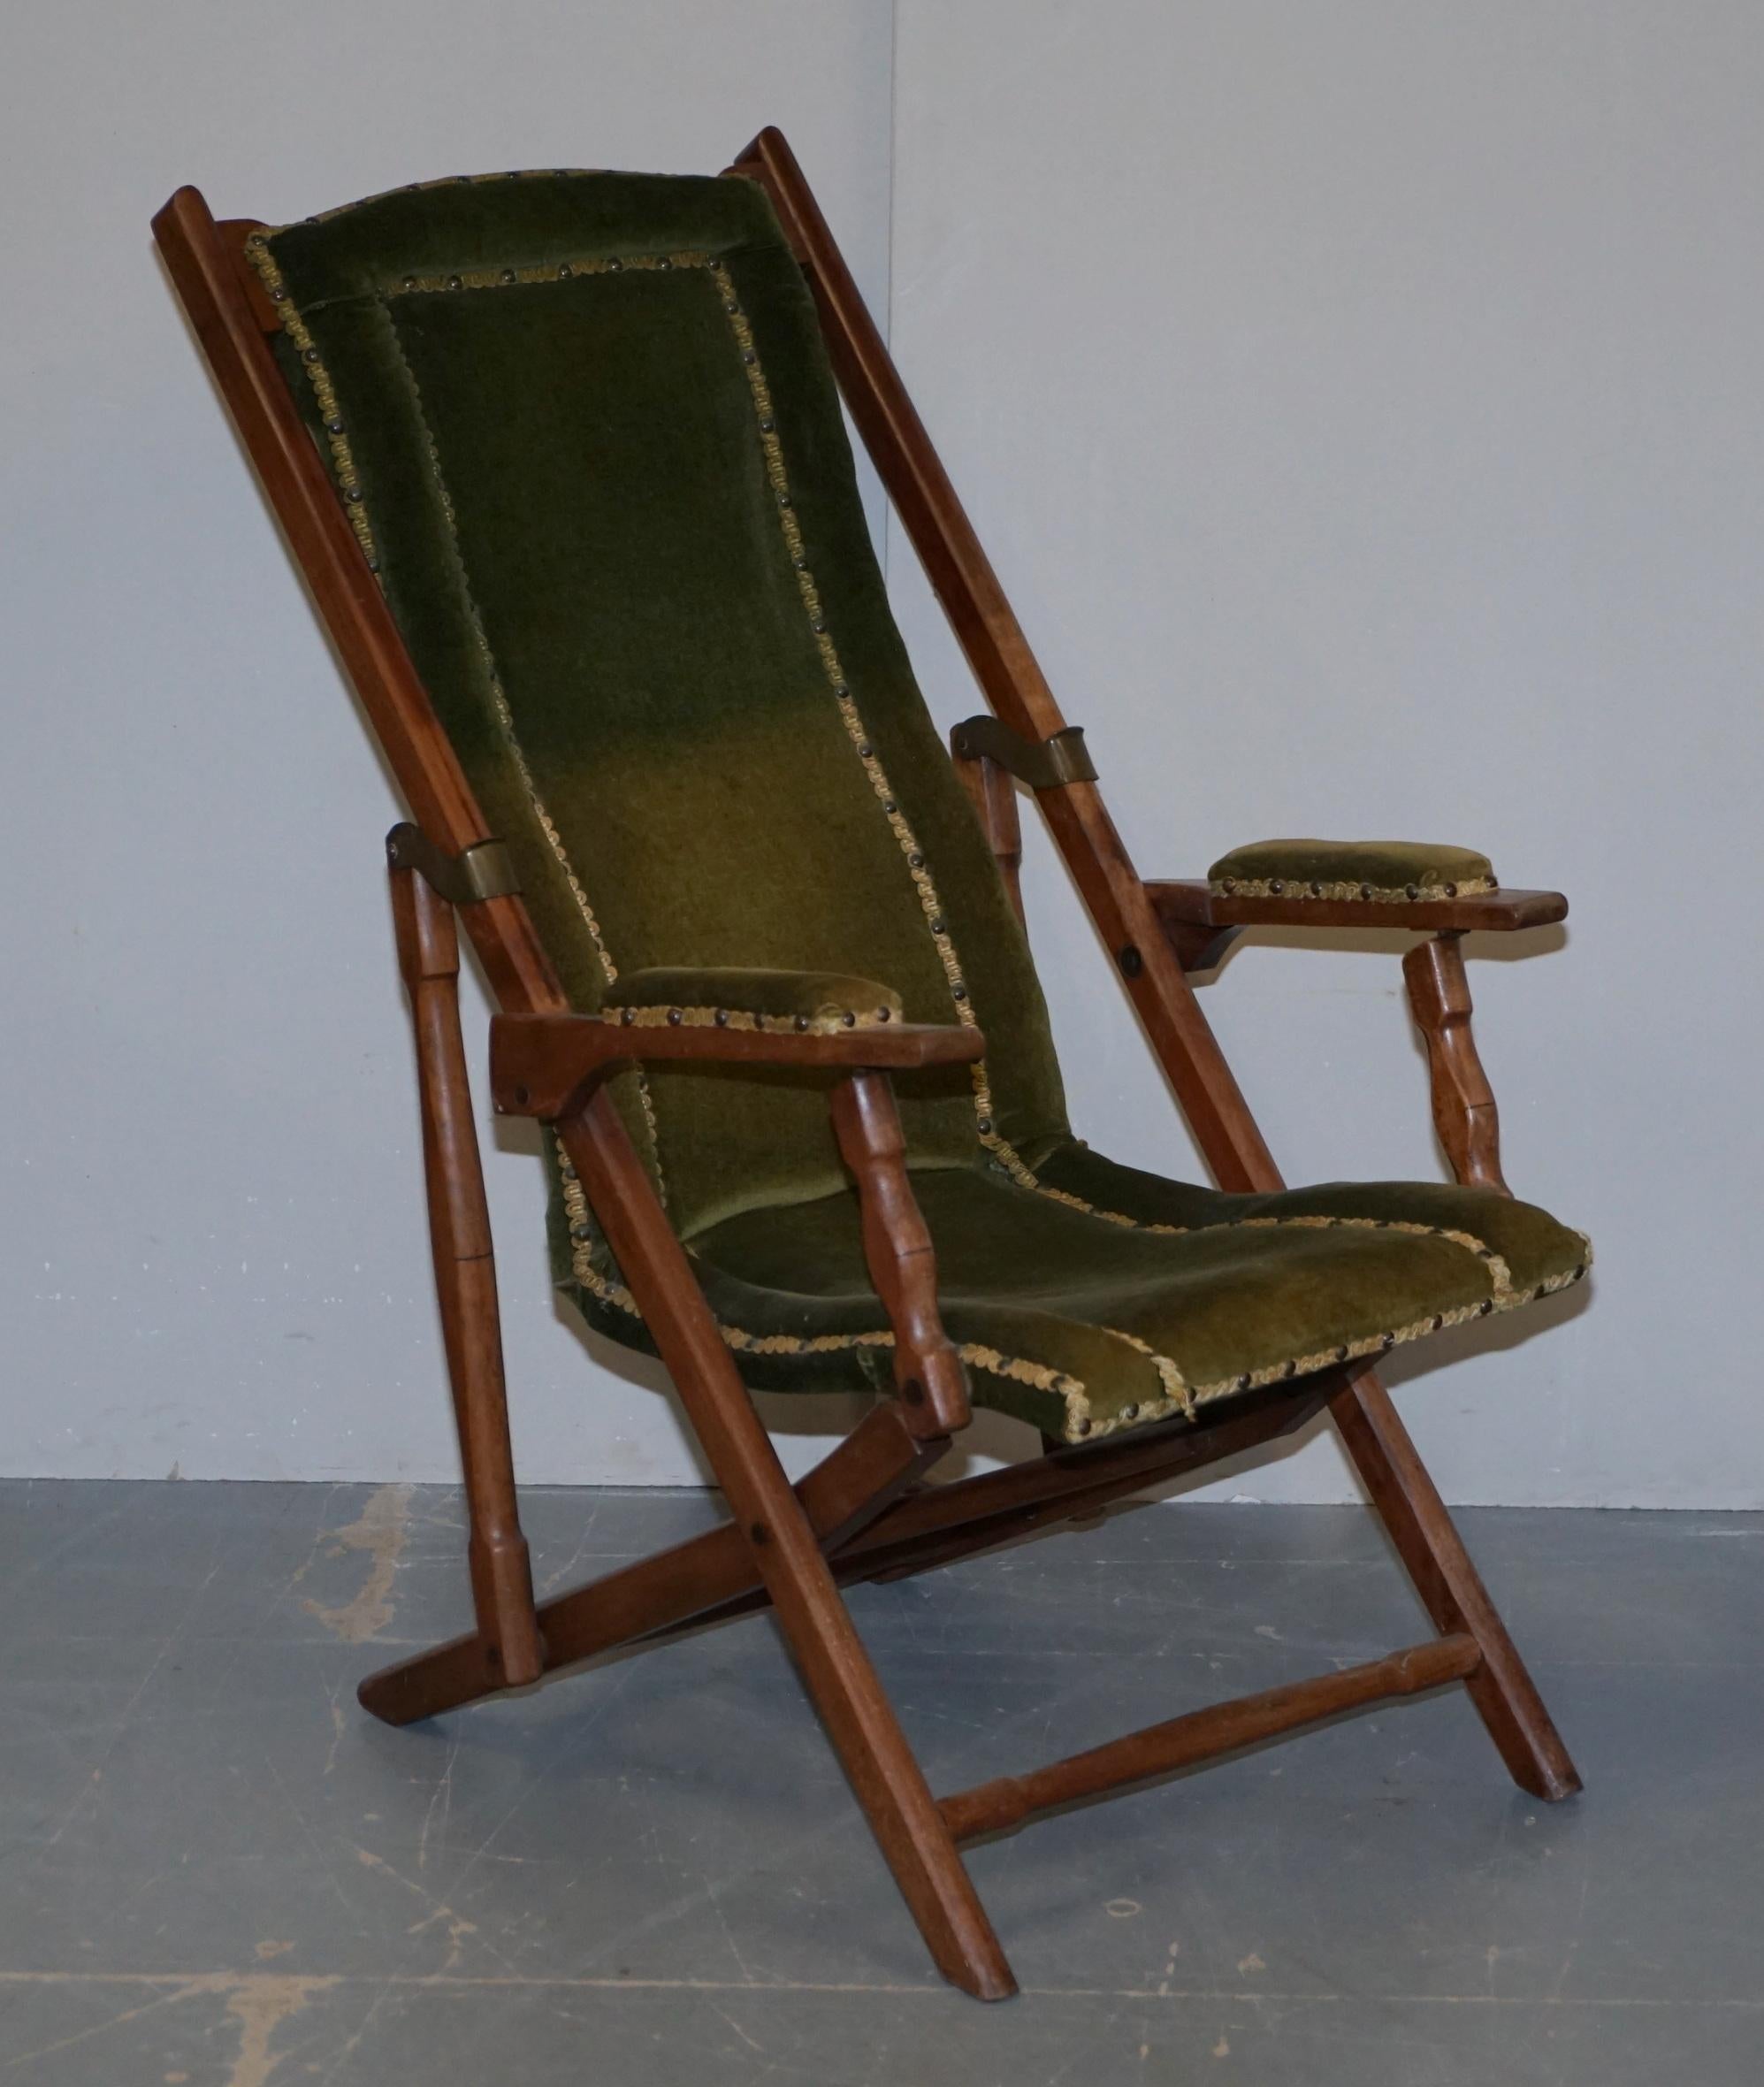 We are delighted to offer for sale this sublime pair of Victorian circa 1880 military campaign style folding chairs 

A very good looking and highly collectable pair of desk steamer campaign chairs. These are highly adjustable until you are pretty